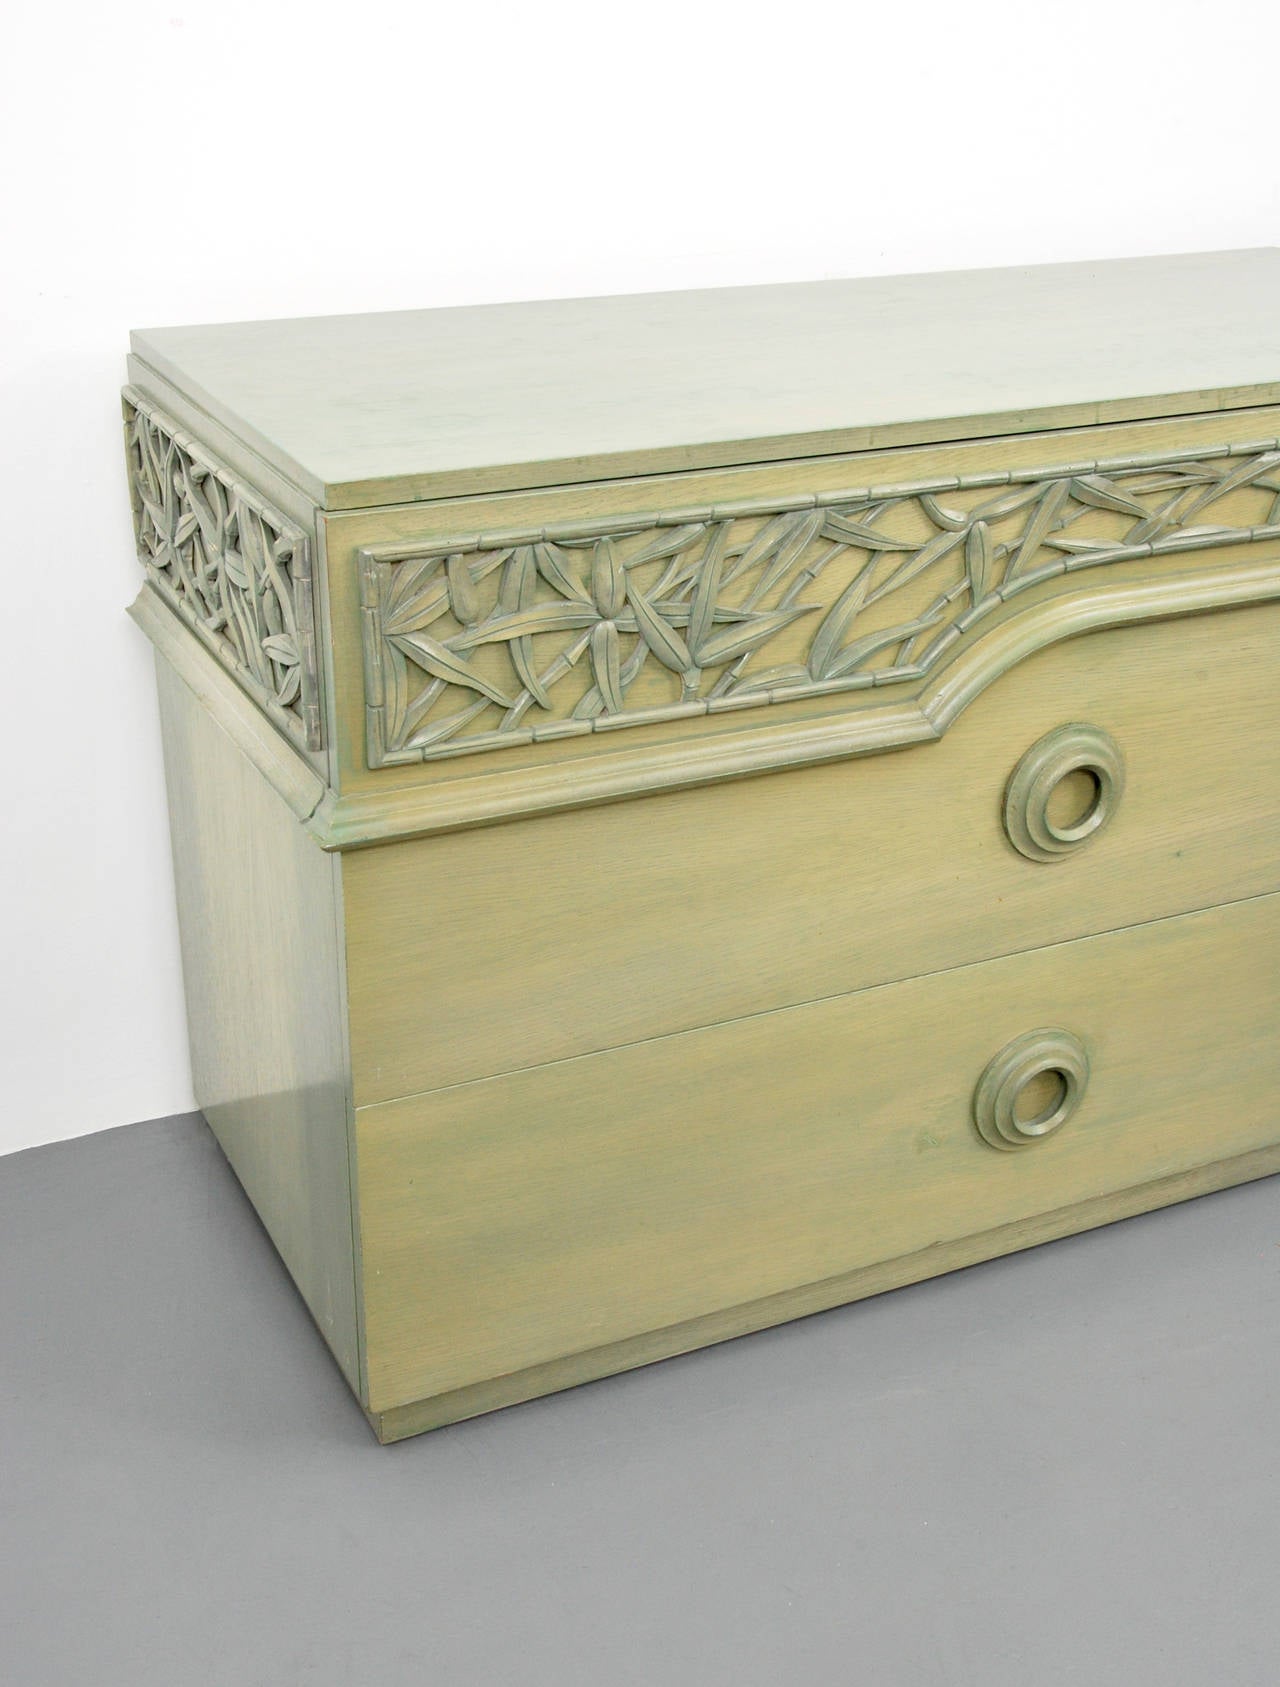 Cabinets join together to form one long cabinet. Each cabinet features three drawers with an applied tropical decoration. Sold as a set. Dimensions: 31.5